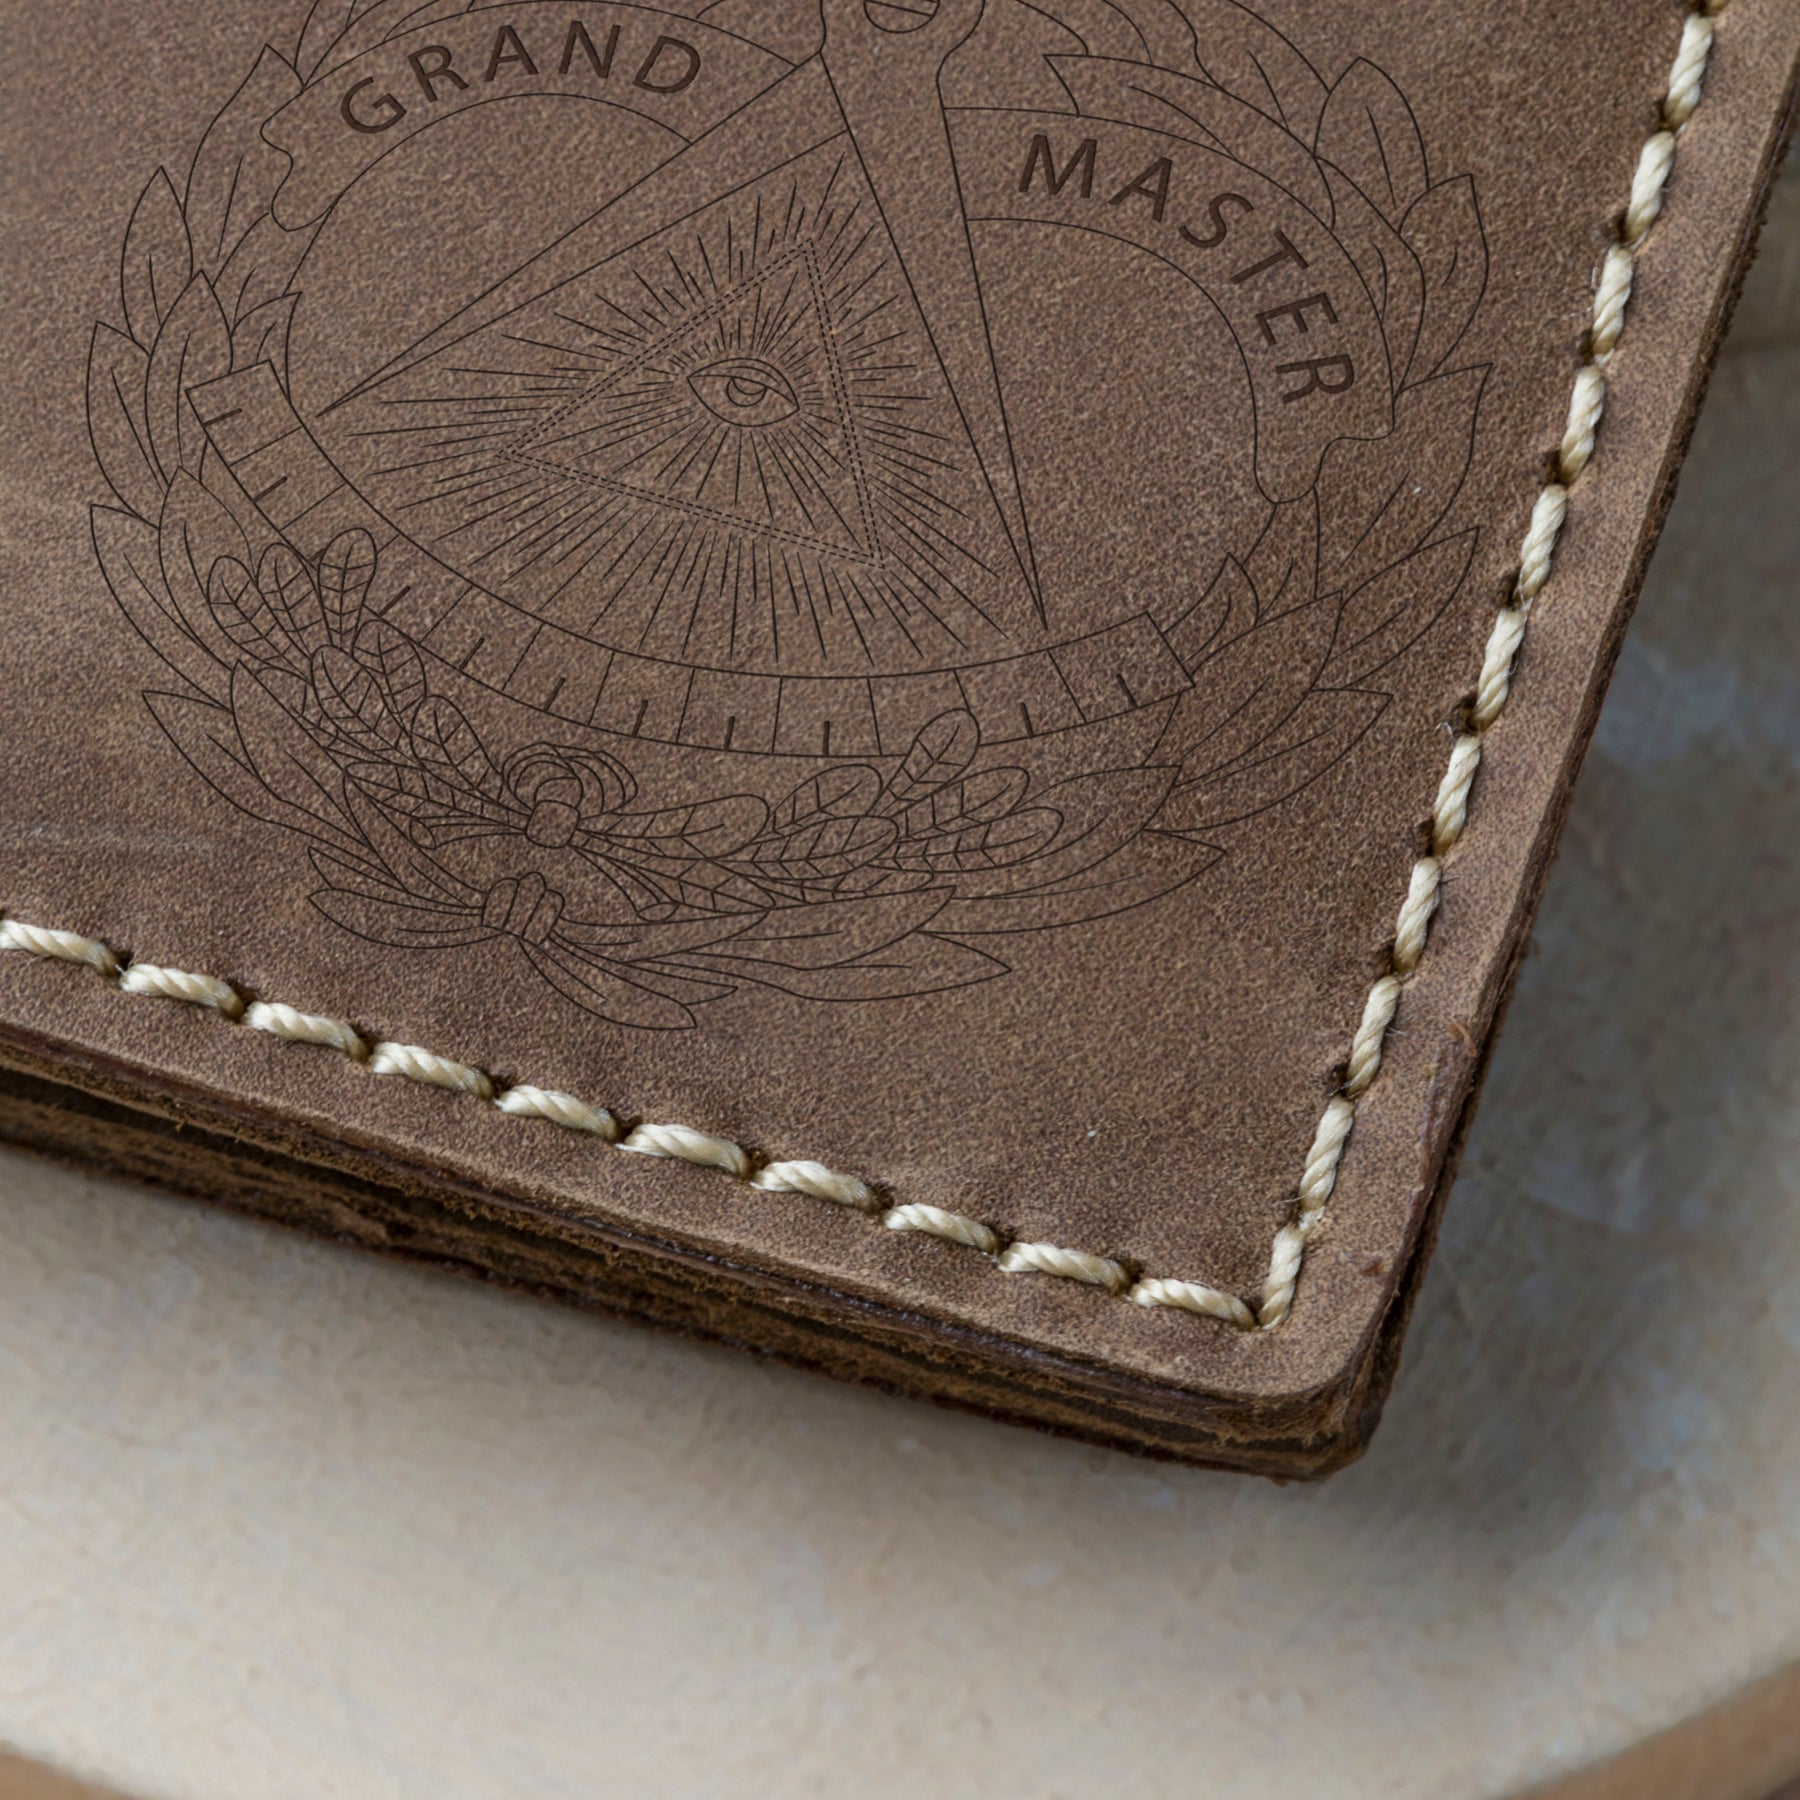 Grand Master Blue Lodge Wallet - Handmade Leather